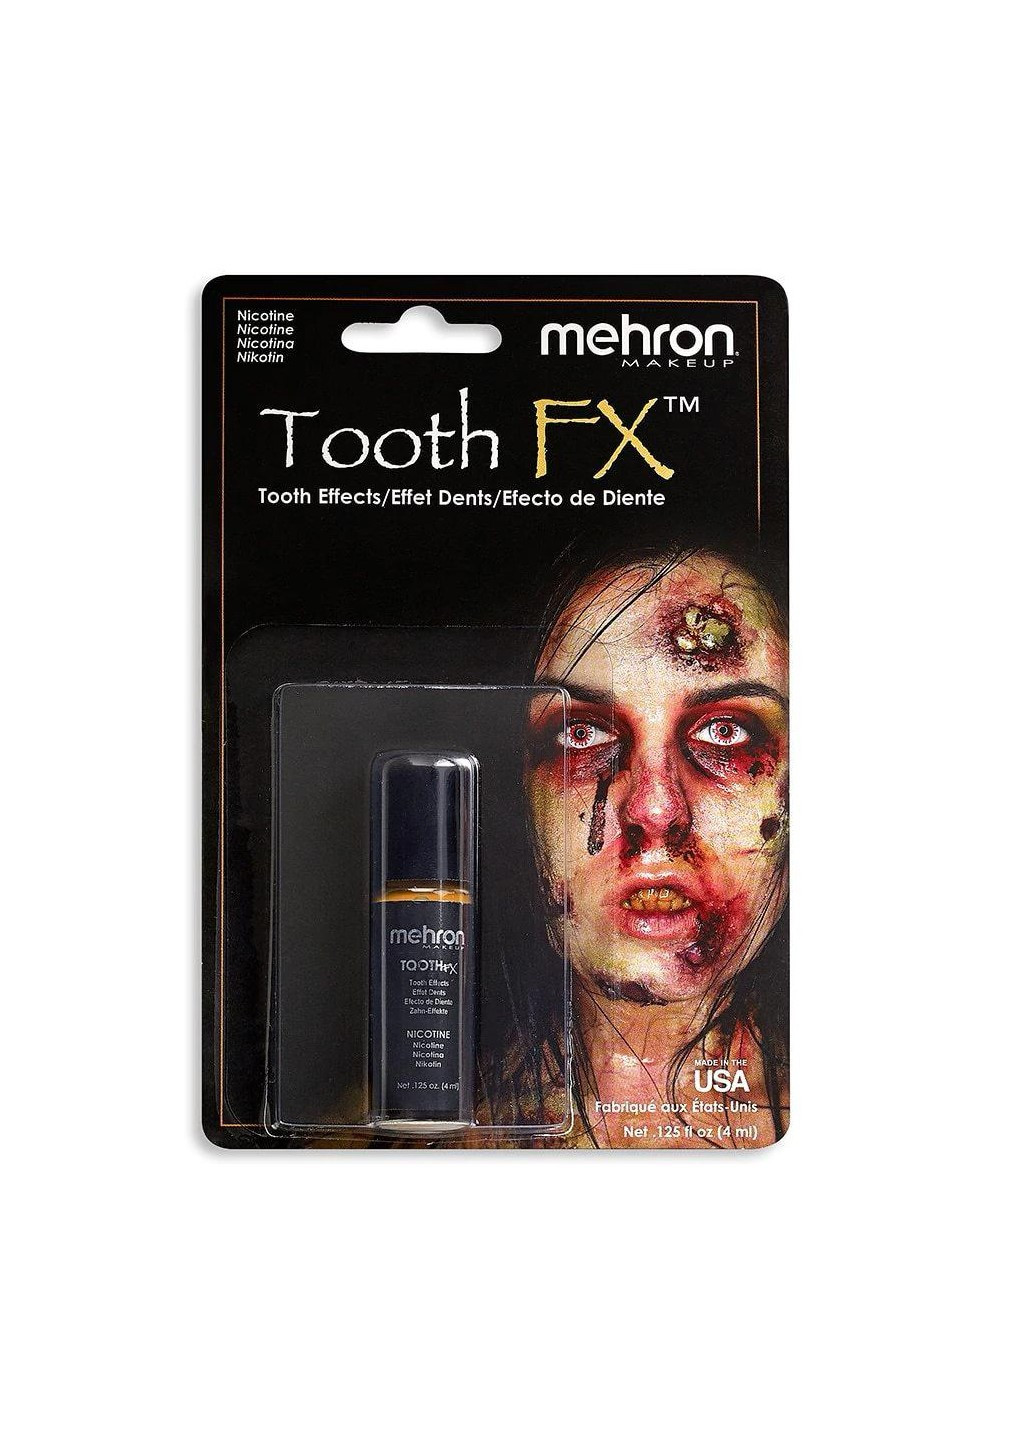 Фарба для зубів Tooth FX with Brush for Special Effects - Nicotine, (Нікотин), 4 мл Mehron (205593209)